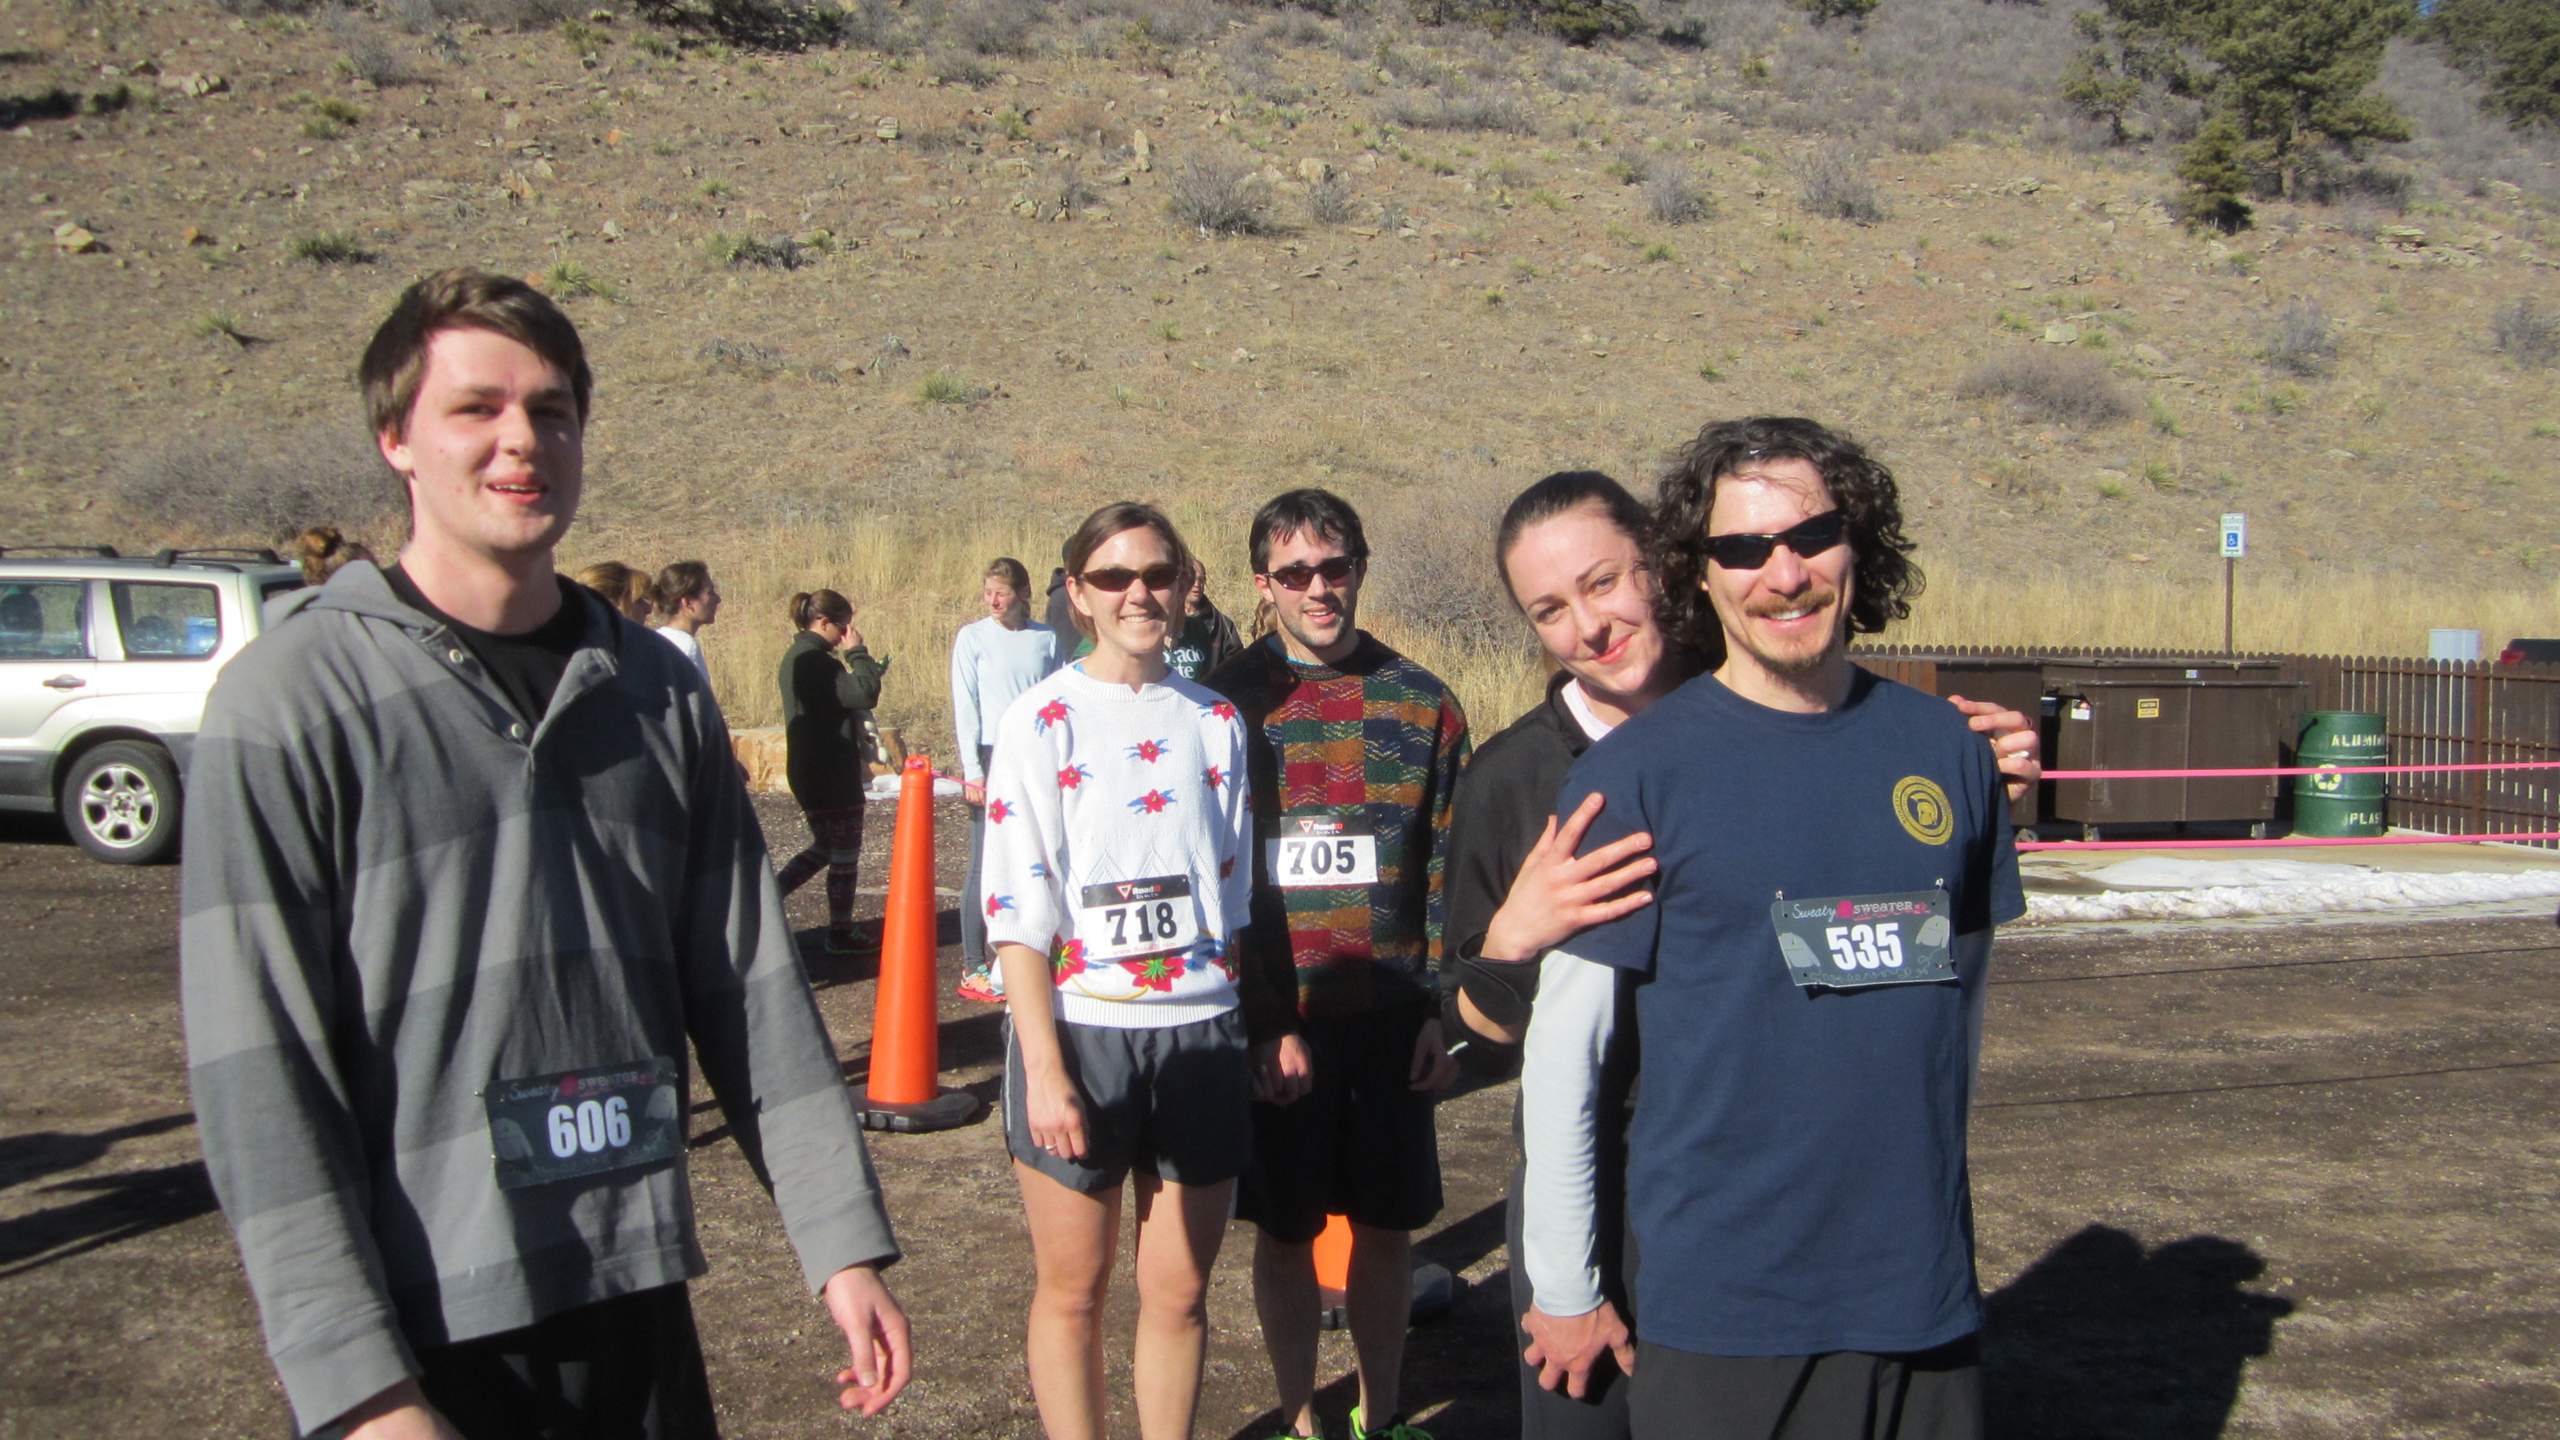 Andrew, Dani, Nick, Katherine and Hector after the run.